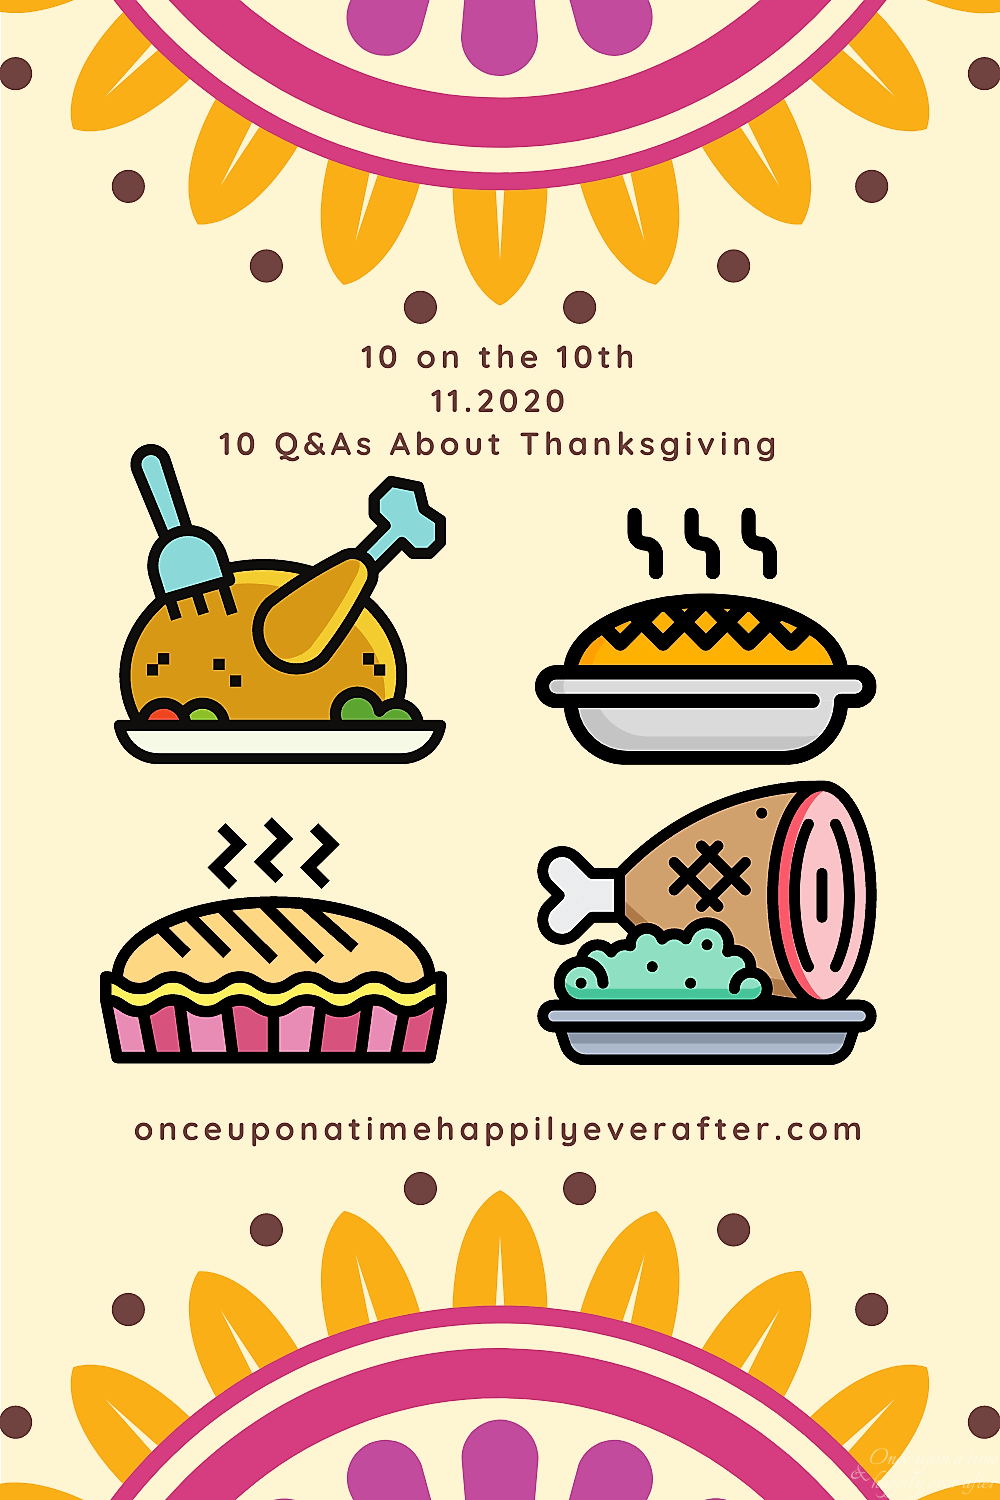 10 on the 10th 11.2020: Thanksgiving Q & As